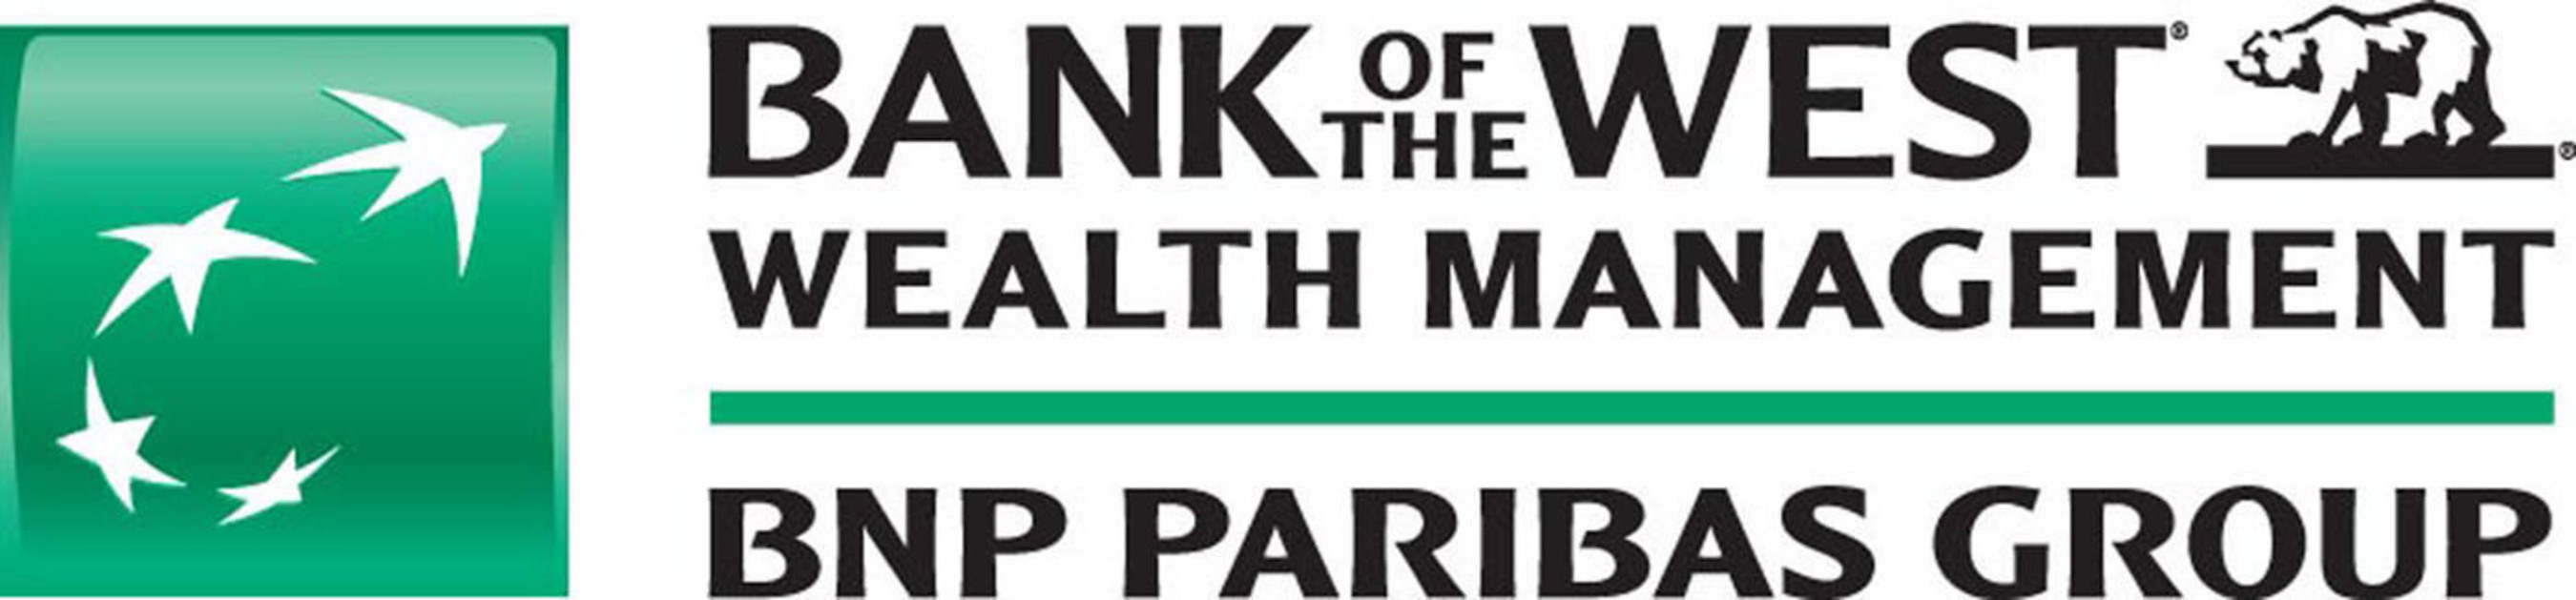 Bank of the West Wealth Management logo.